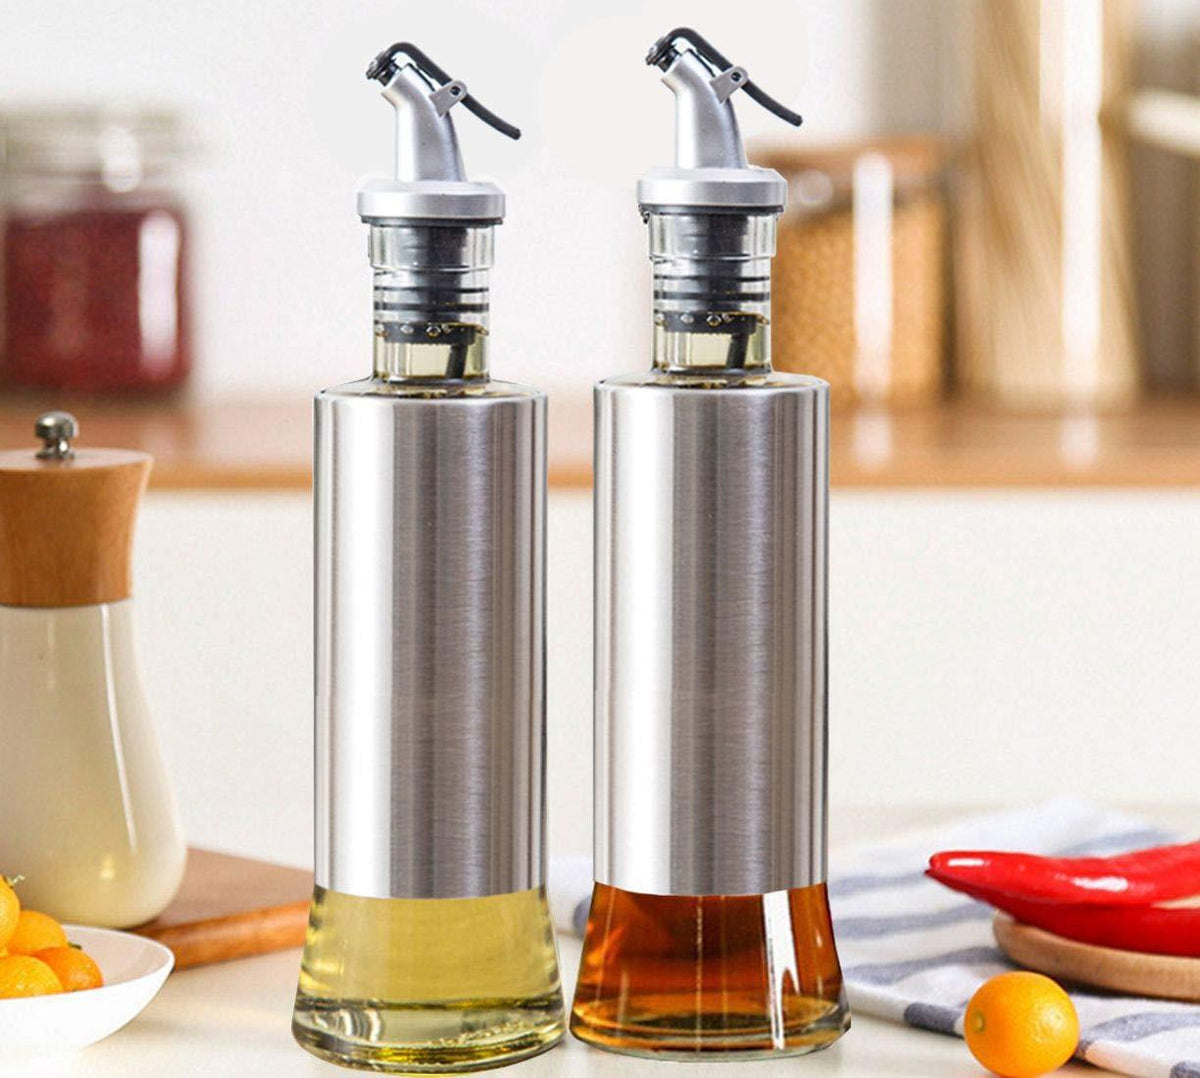 Kitchen Cooking Oil Vinegar Bottle with Dropper Best For Olive oil Usage Glass and Stainless Steel – 300 ml - REVEL.PK